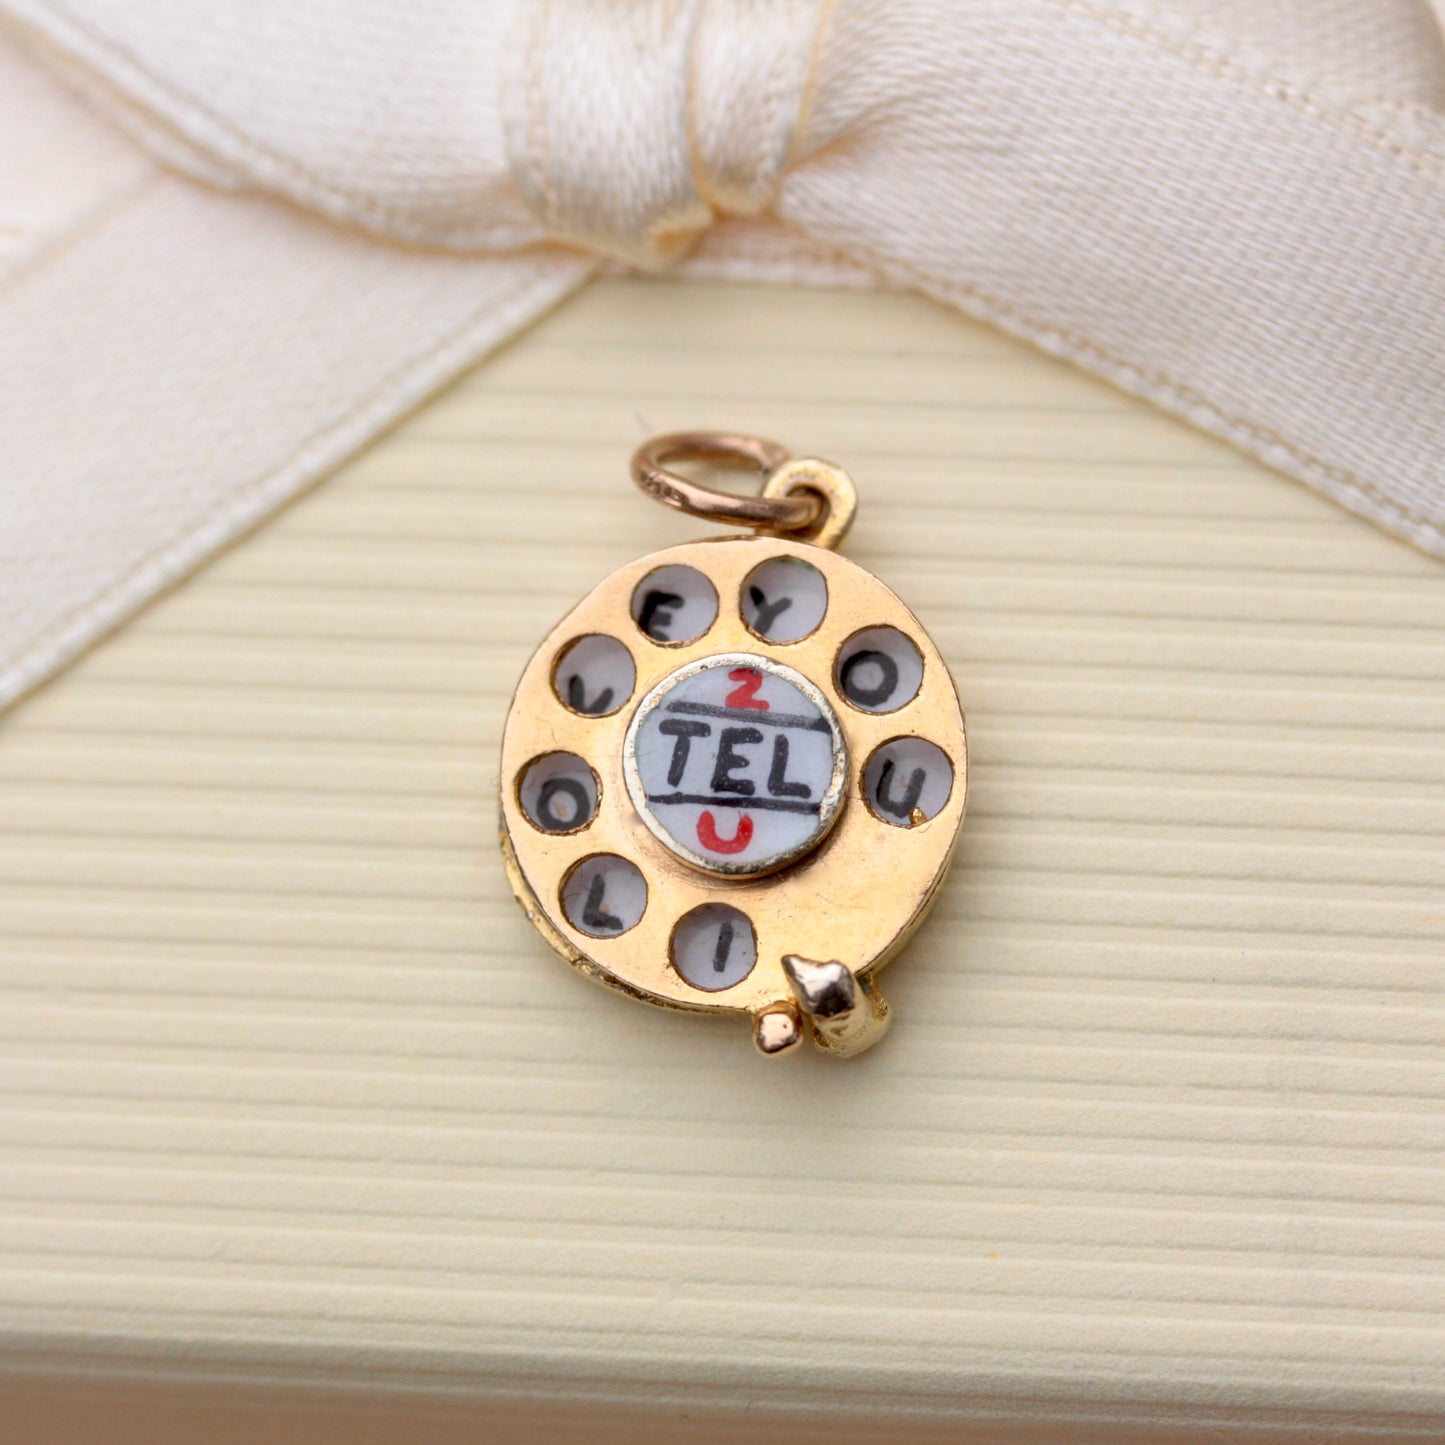 Vintage 9ct Gold and Enamel "I LOVE YOU" Rotary Dial Charm, 1963